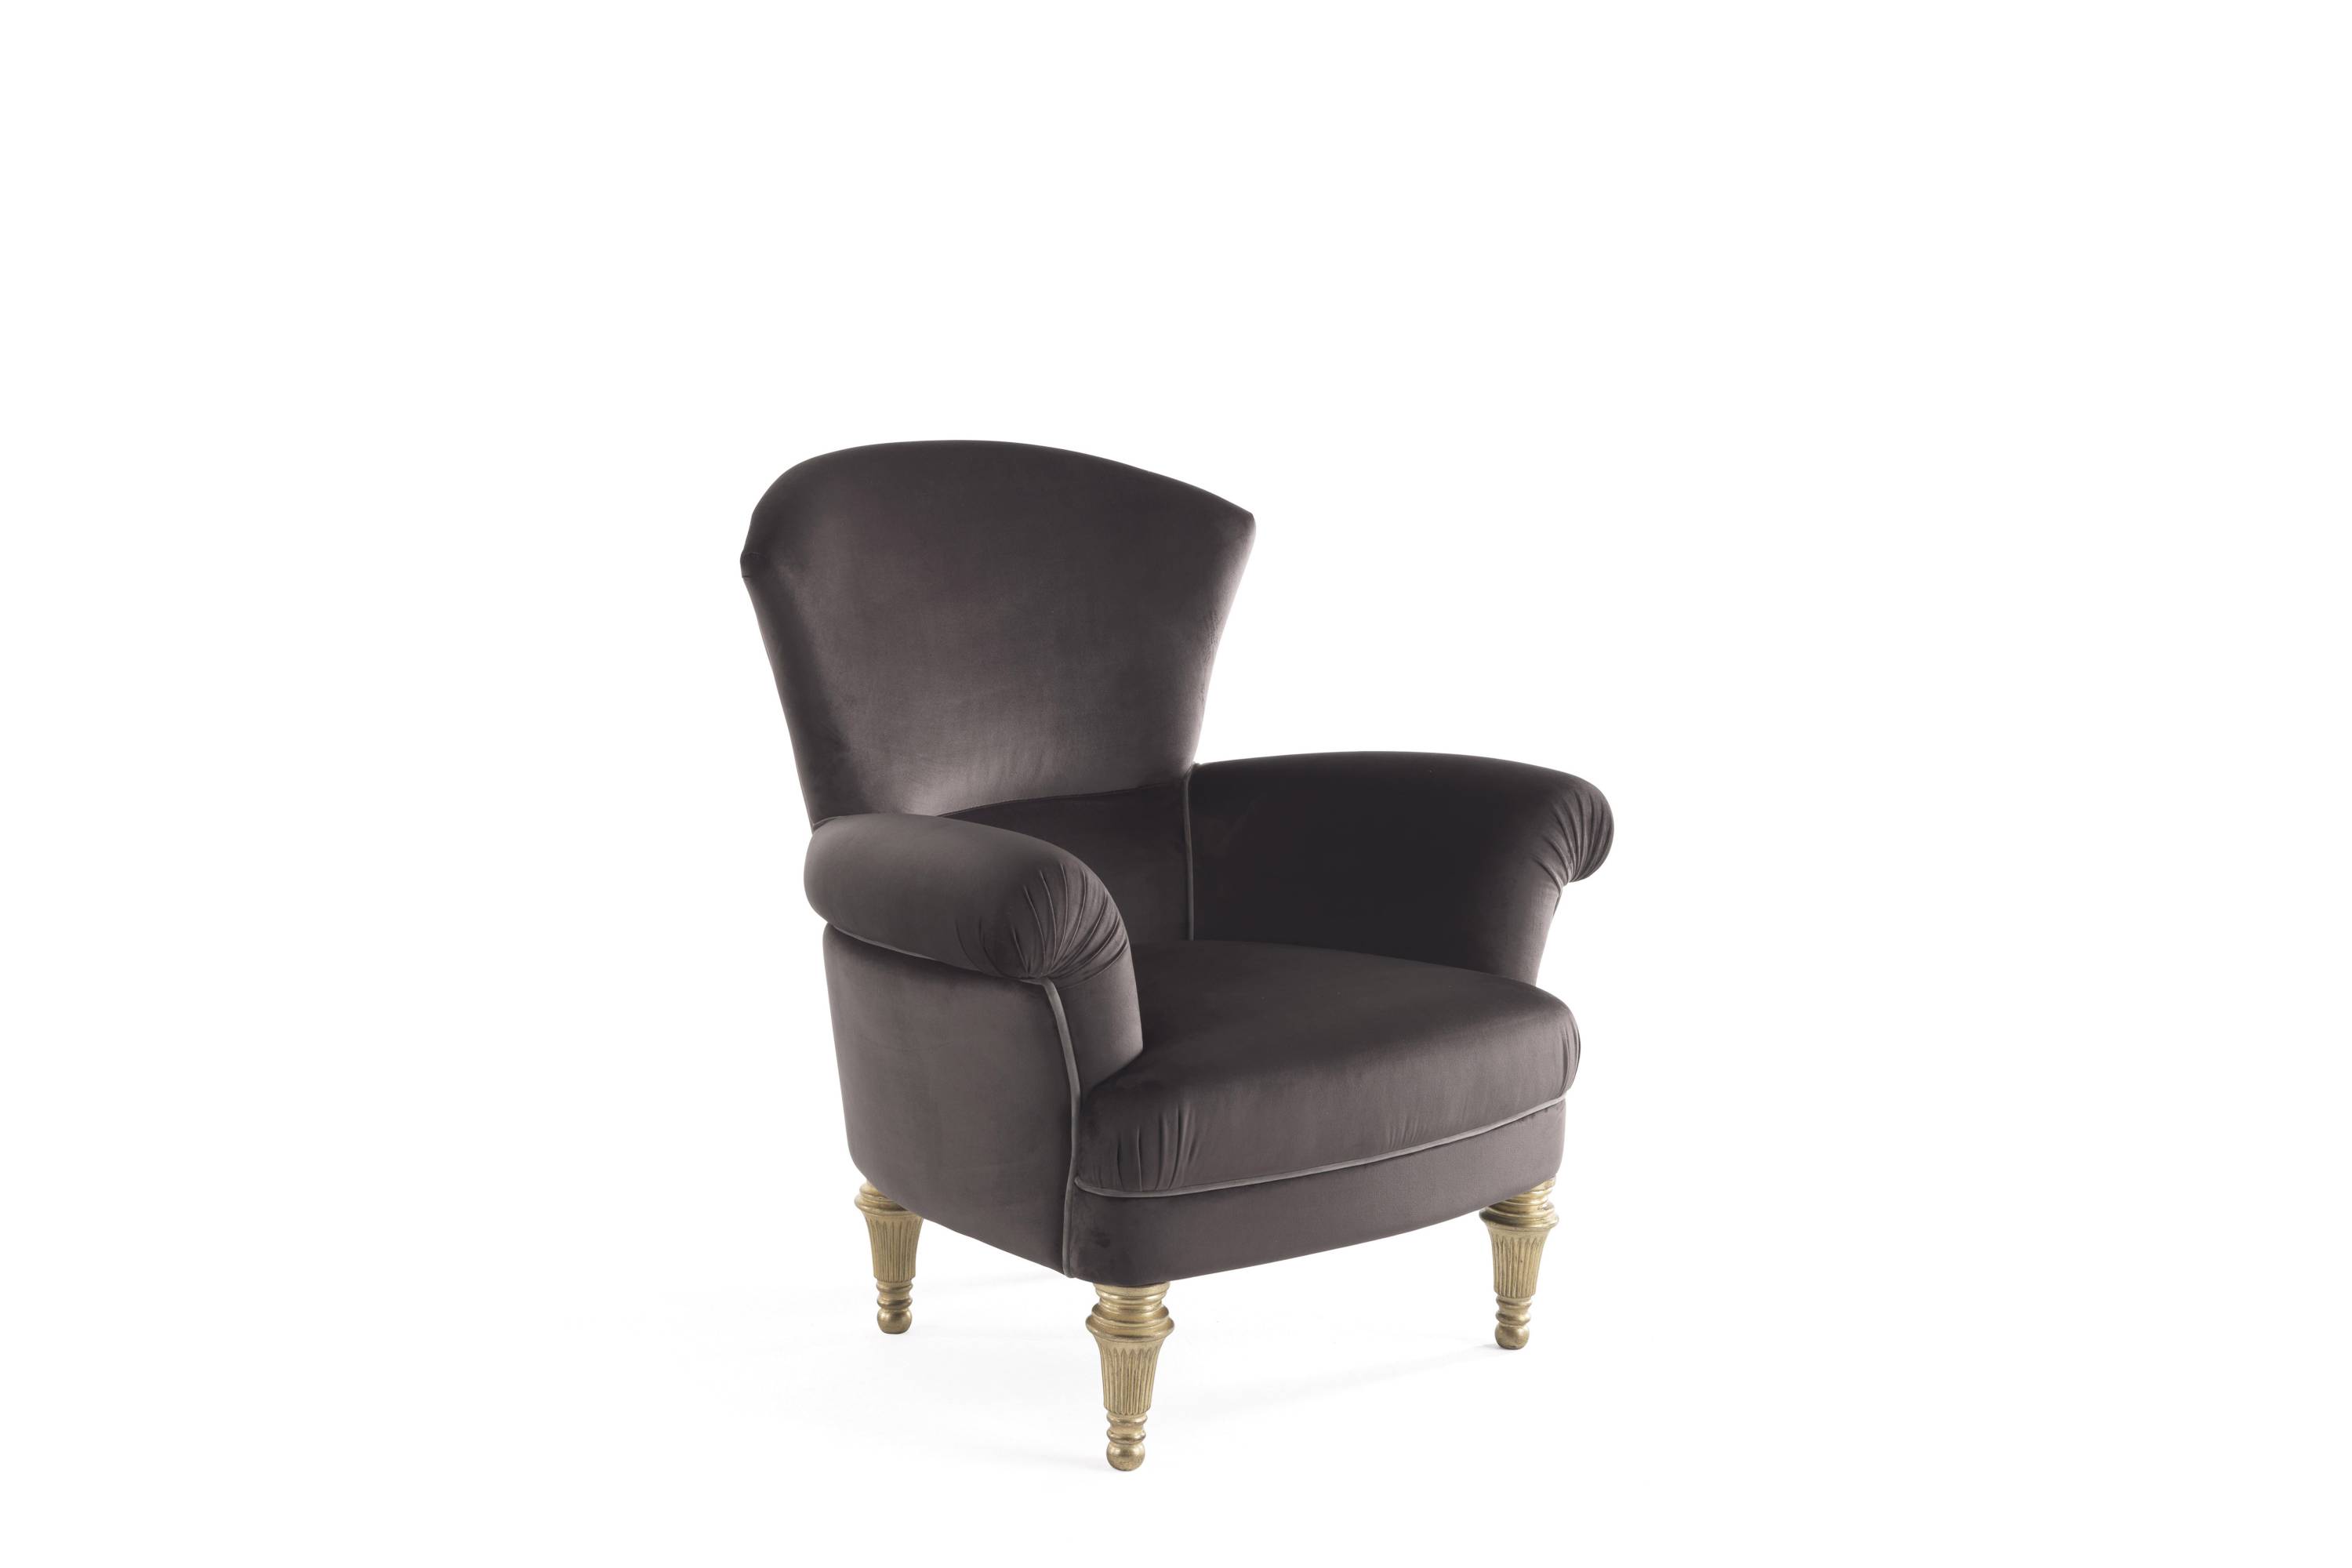 RIVOLI armchair - convey elegance to each space with Italian classic armchairs of the classic Oro Bianco collection